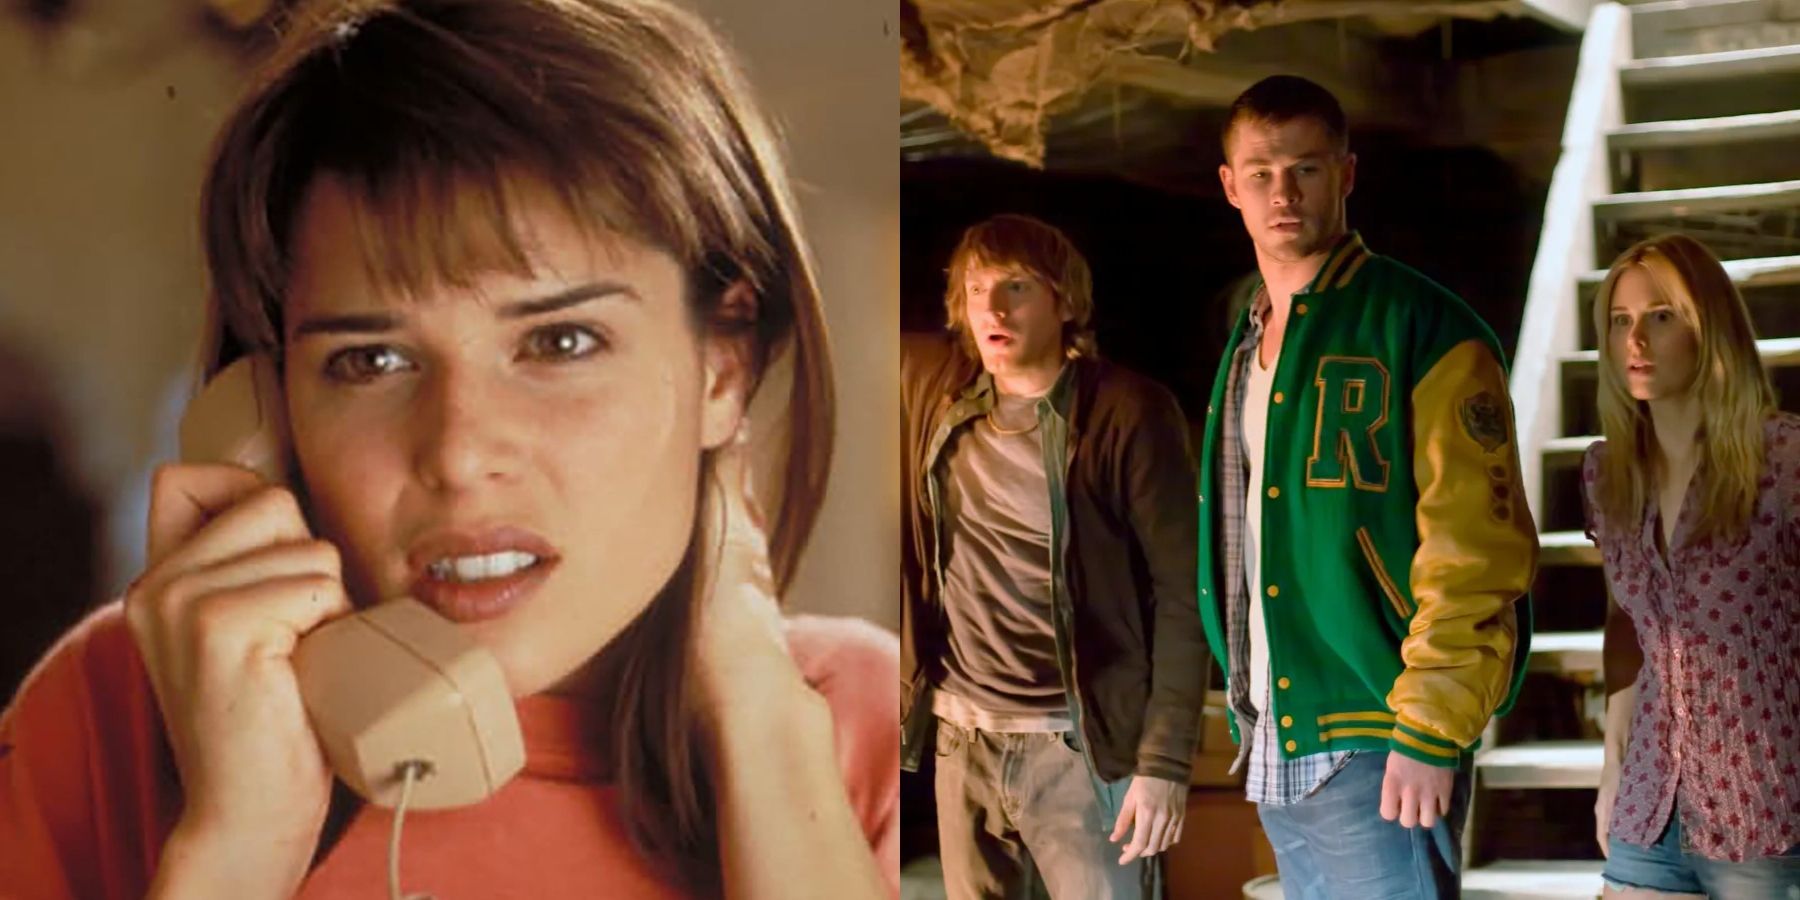 Split image of Neve Campbell in Scream (1996) and Fran Kranz, Chris Hemsworth, and Anna Hutchison in The Cabin In The Woods (2011)